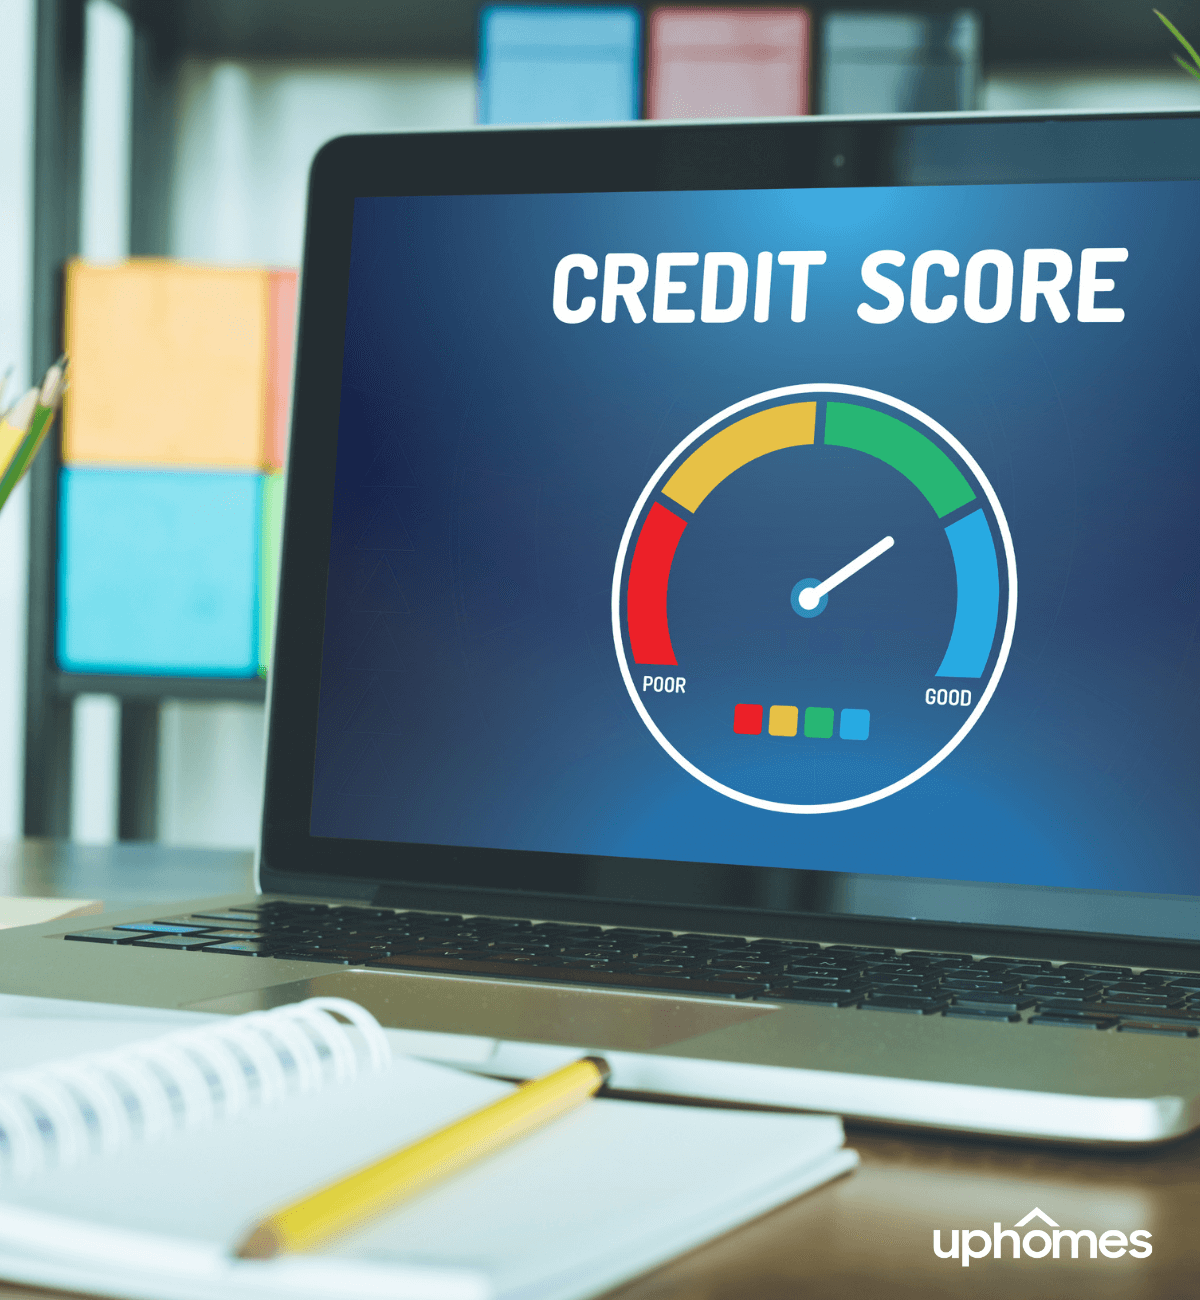 How Often Does Credit Karma Update?